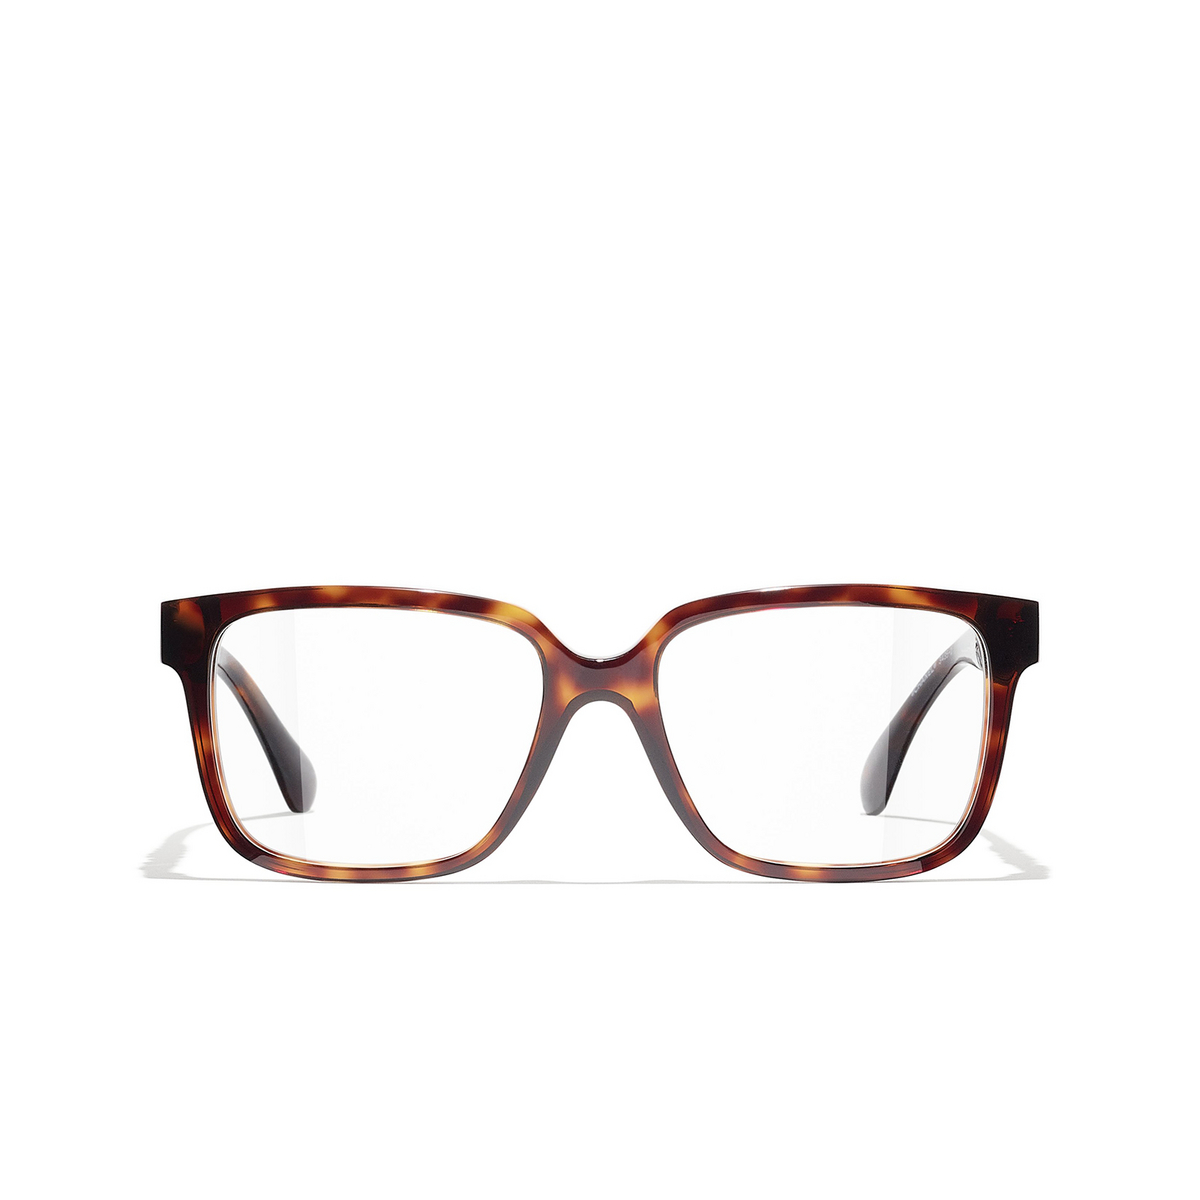 CHANEL square Eyeglasses 1164 Tortoise - front view